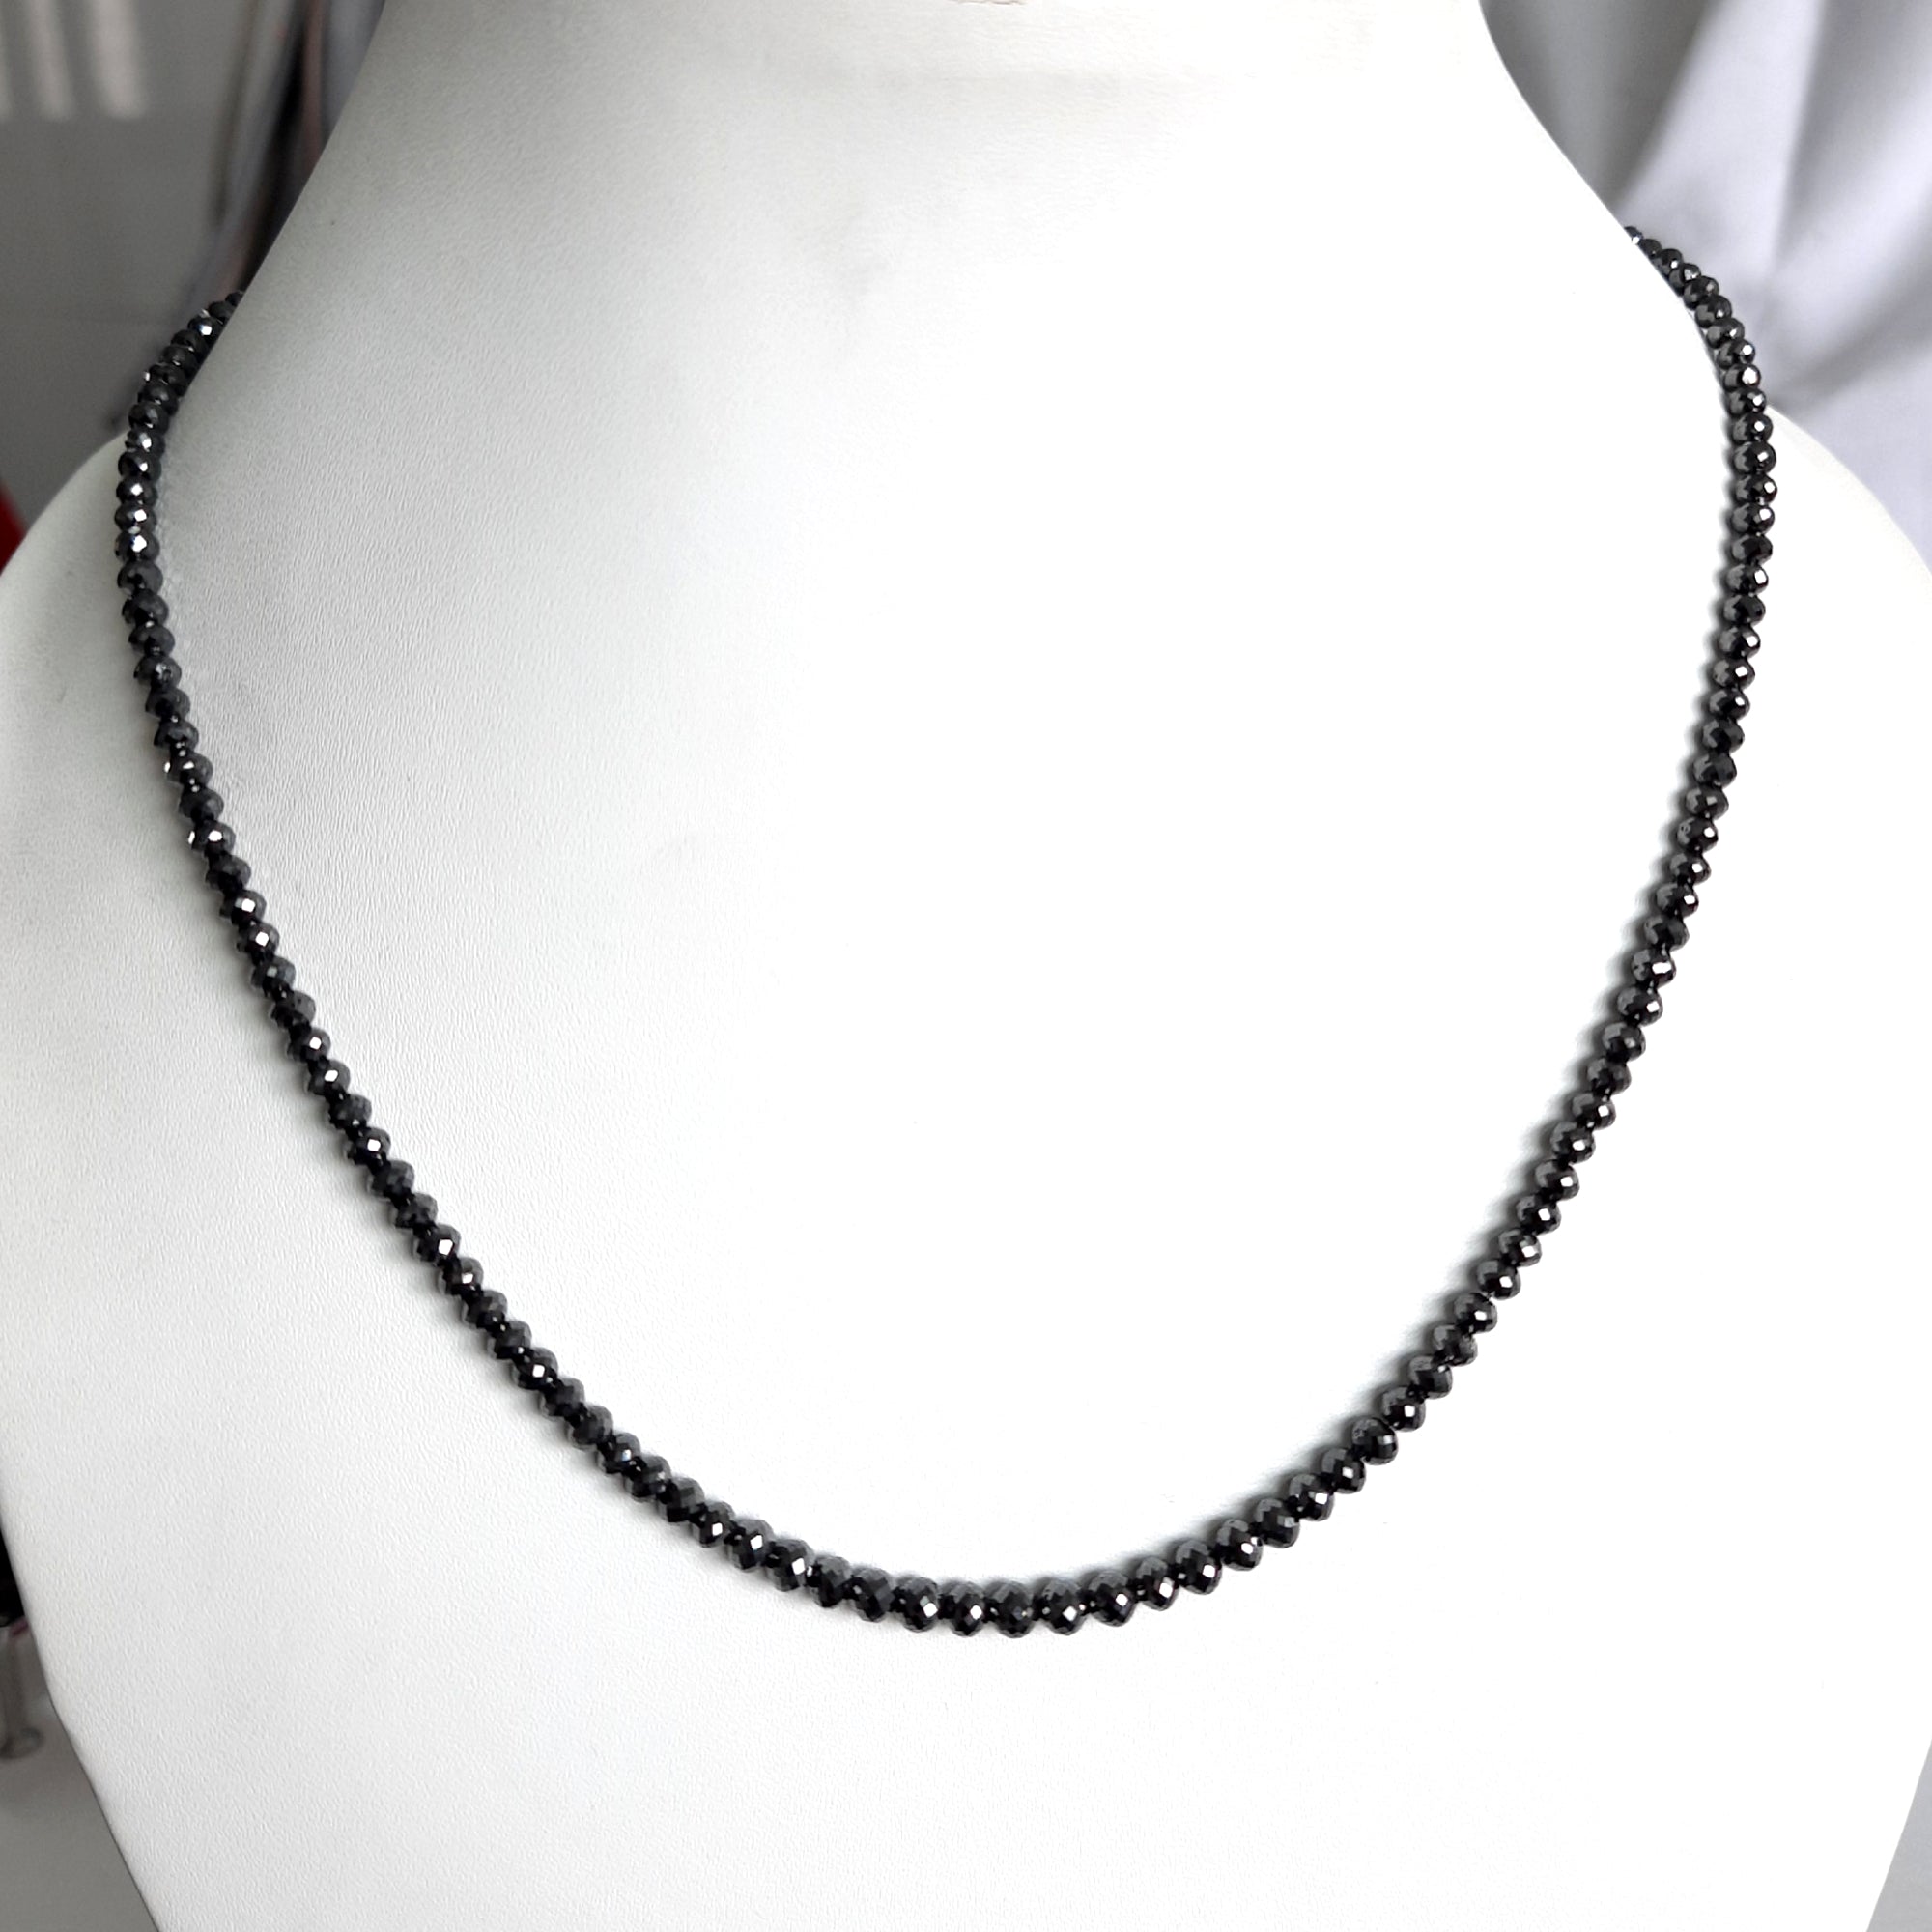 22" Inches Black Diamond Ball Beads Necklace for Precious Gift